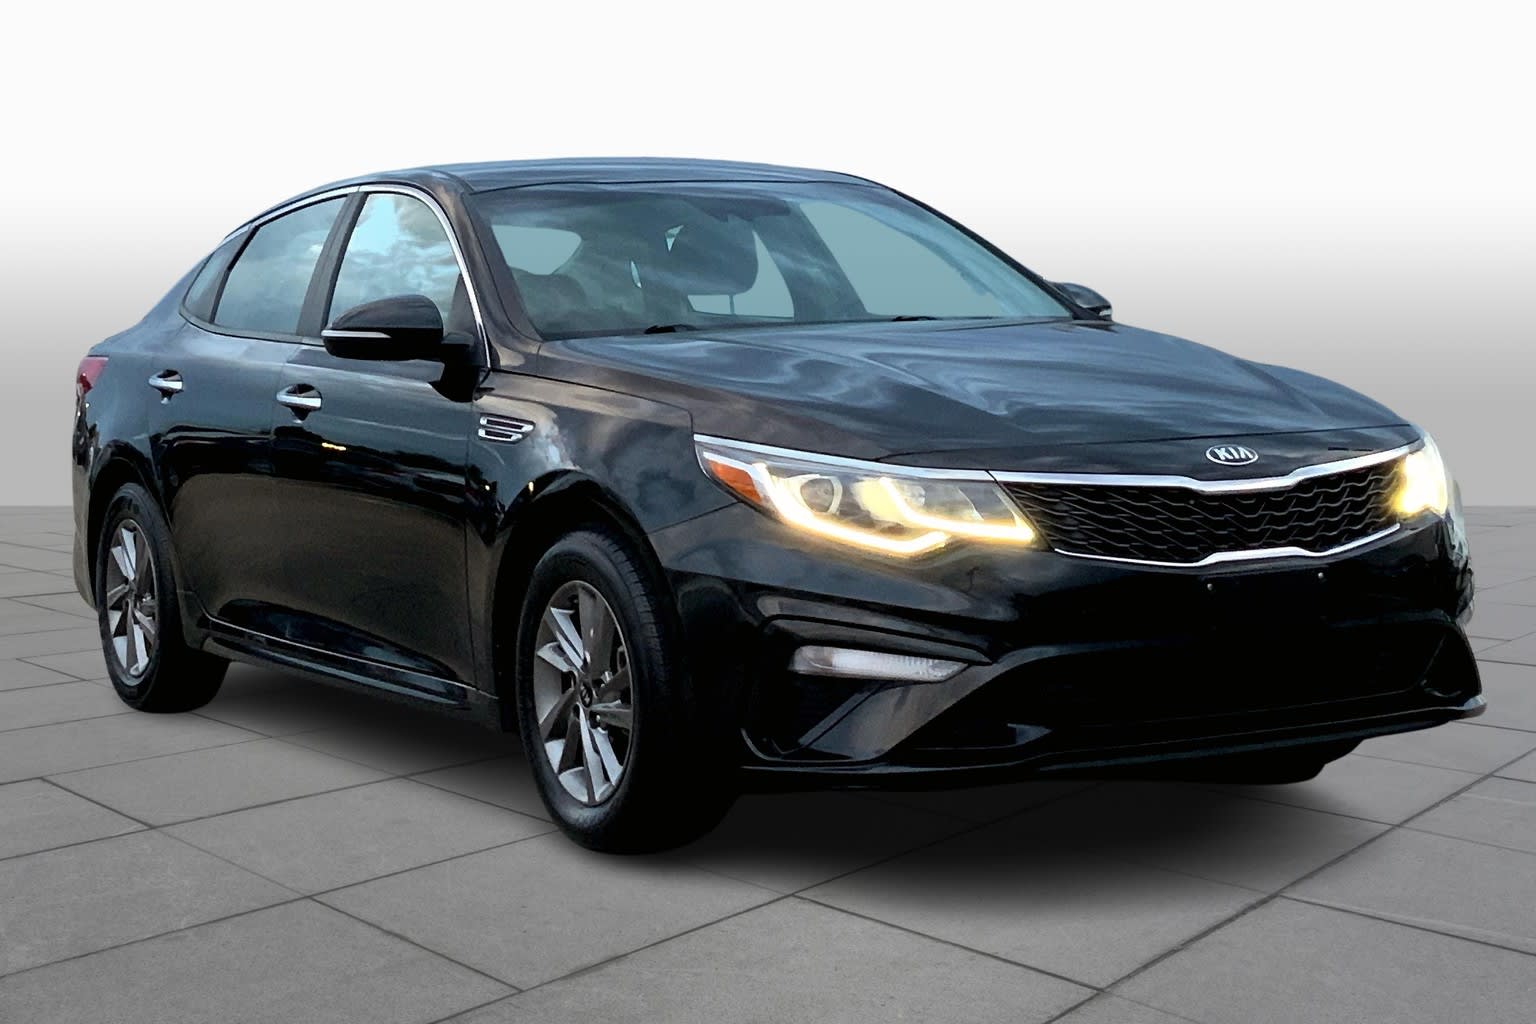 Used 2020 Kia Optima LX with VIN 5XXGT4L3XLG391342 for sale in Houston, TX